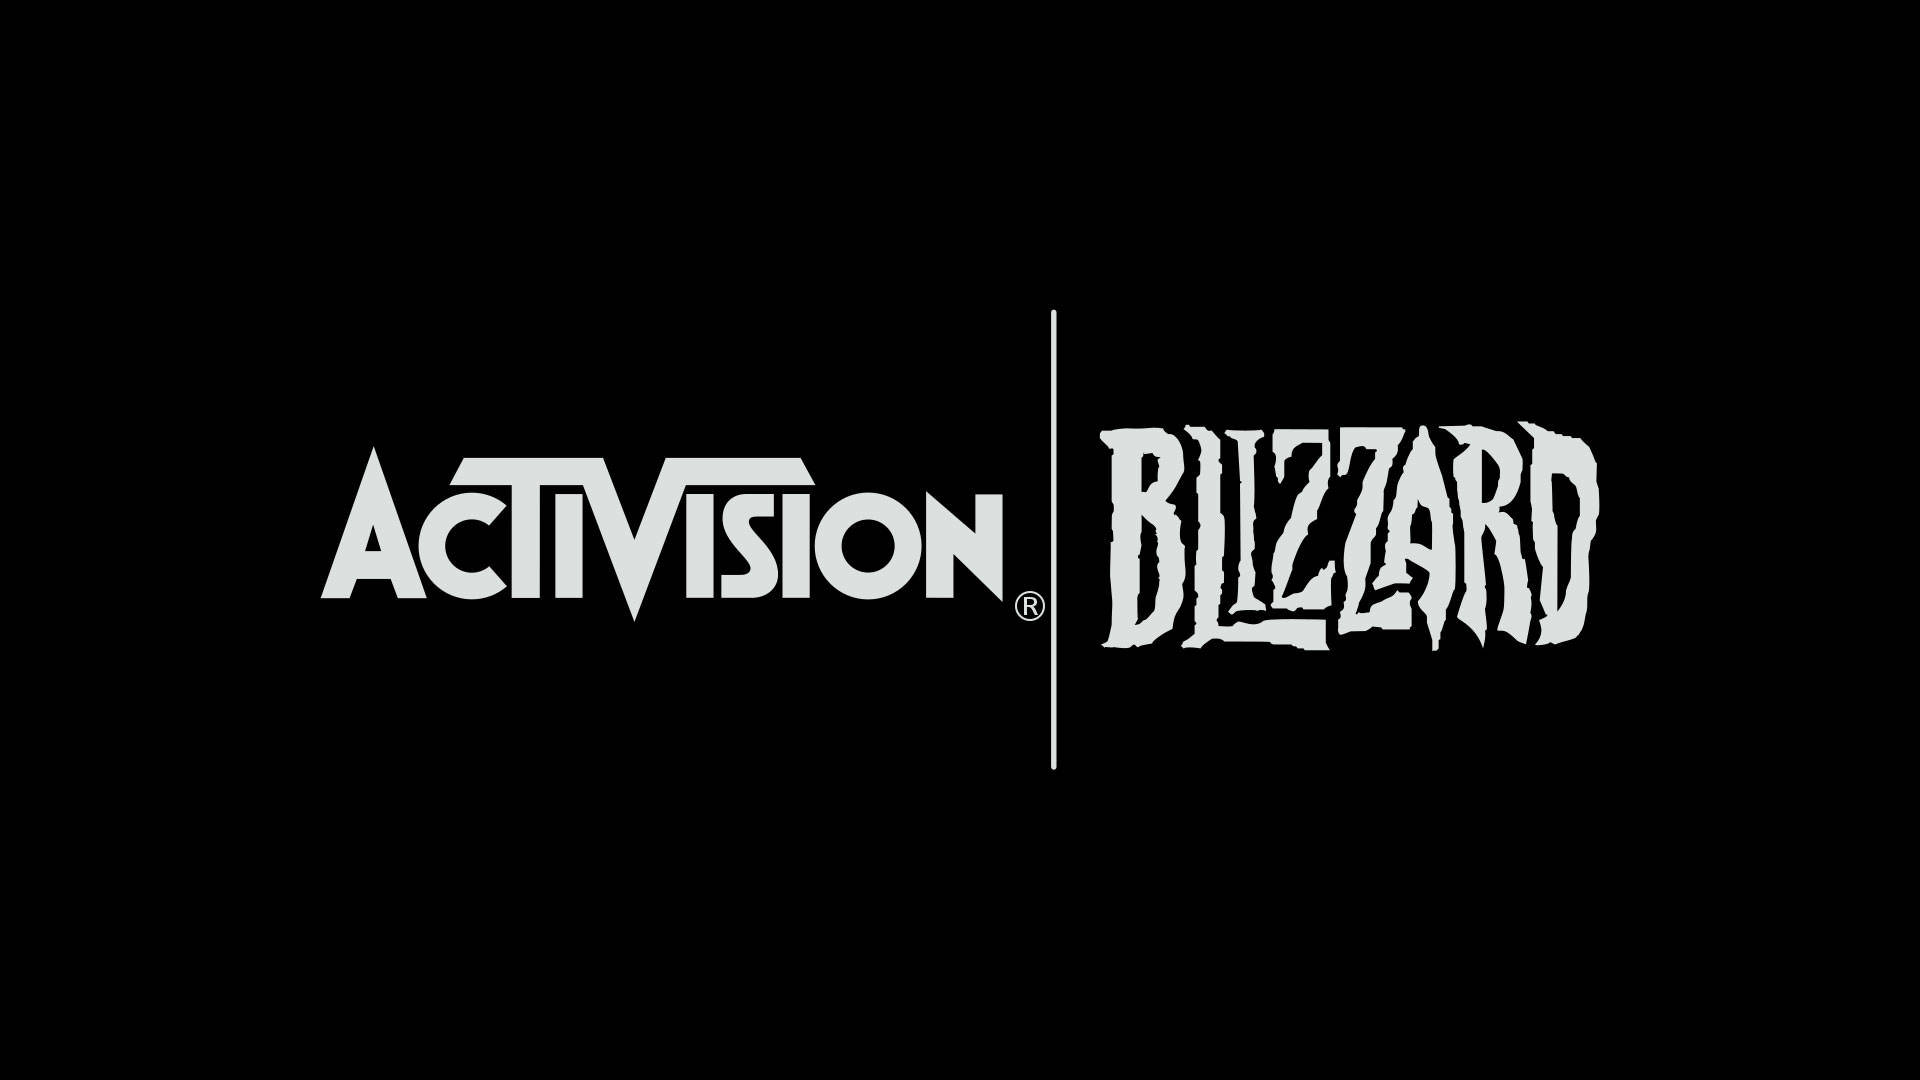 ReManga - Brazil approves Microsoft / Activision Blizzard merger and throws  shade at Sony